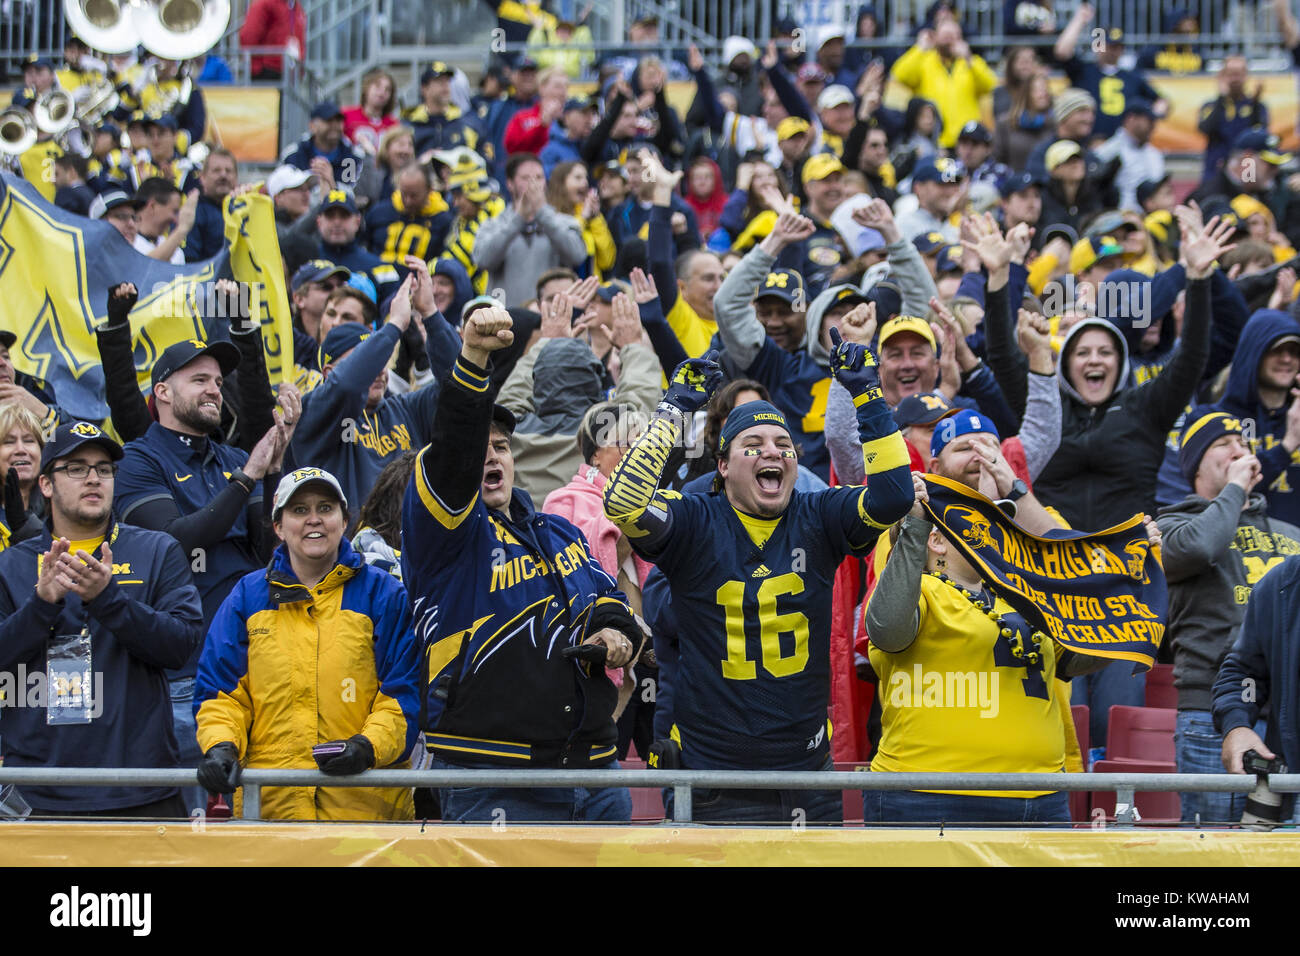 Tampa, Florida, USA. 1st January, 2018. Michigan Wolverines fans during the Outback Bowl at Raymond James Stadium on Monday January 1, 2018 in Tampa, Florida. 1st Jan, 2018. Credit: Travis Pendergrass/ZUMA Wire/Alamy Live News Stock Photo